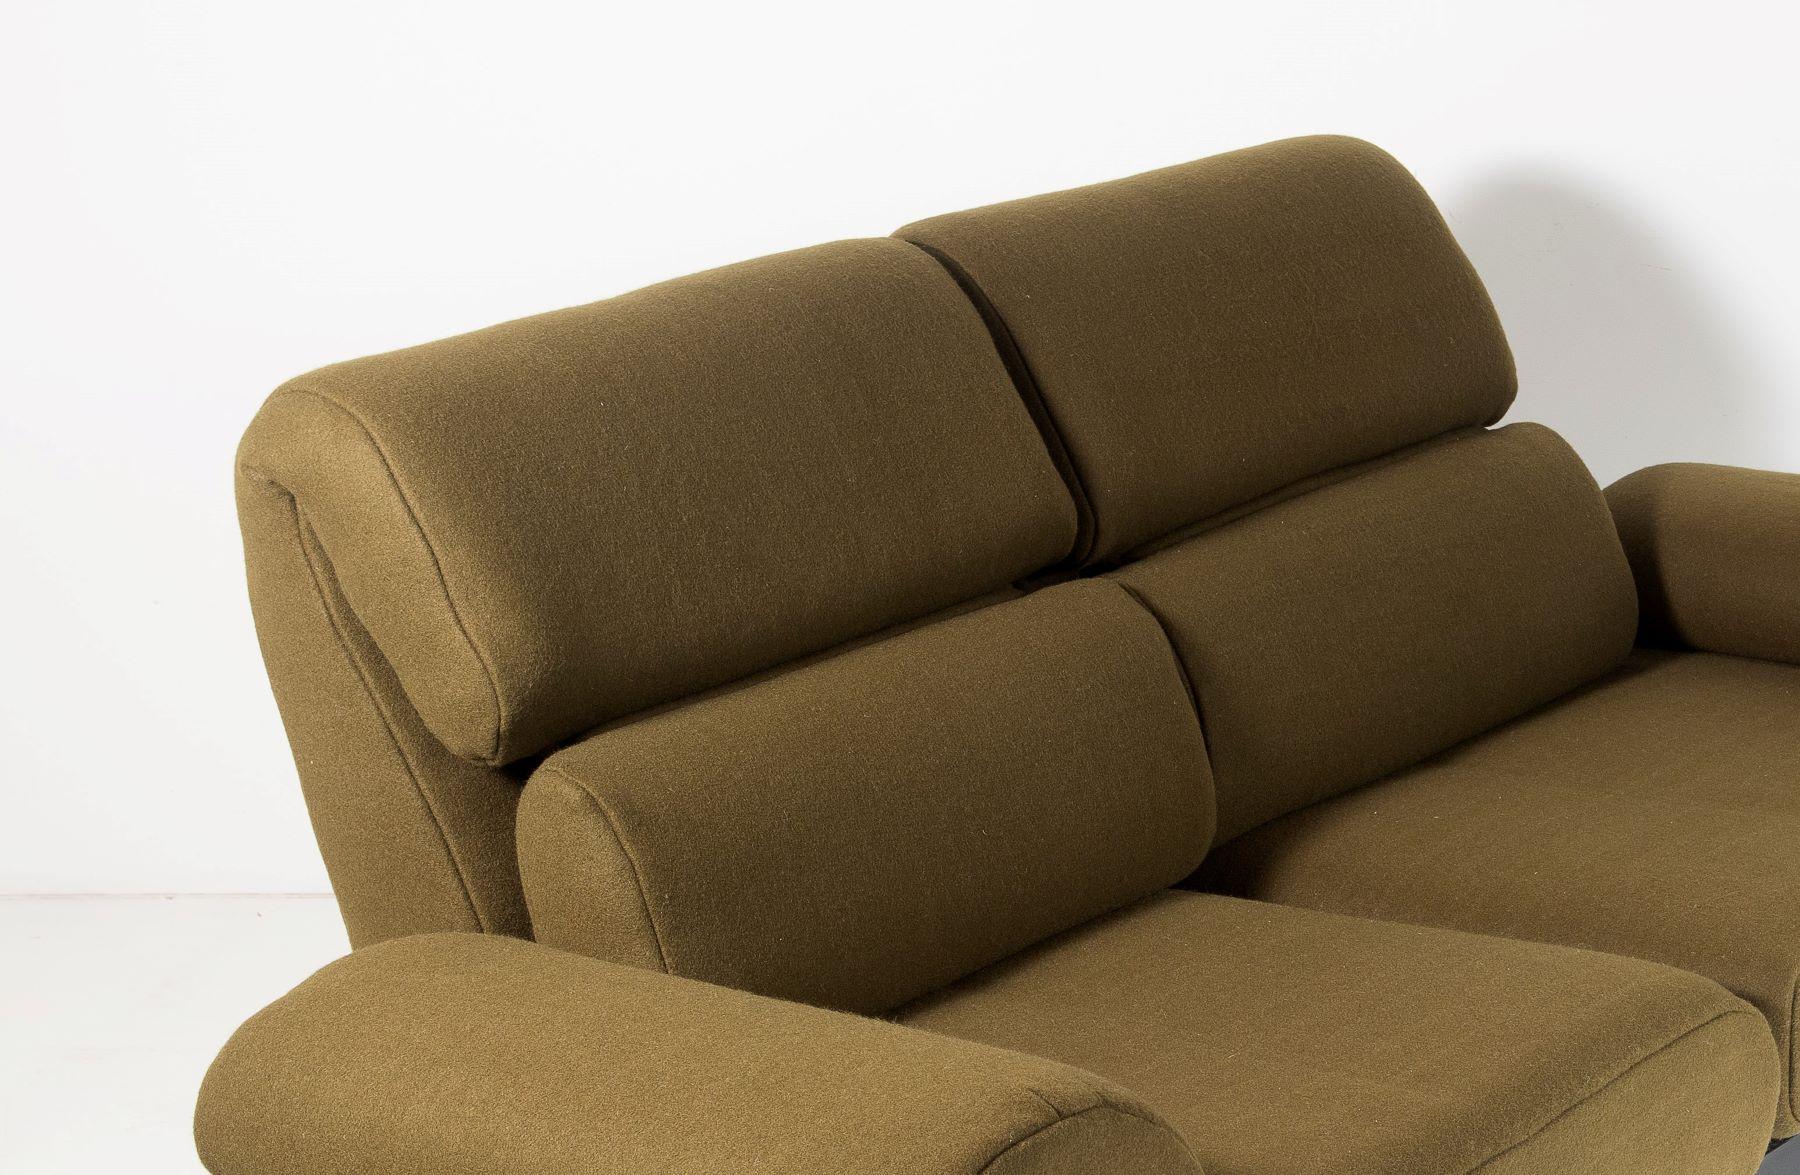 1980s Two Seater Day Bed Recliner Sofa in Olive Green - De-Sede Ds 470 Couch 2